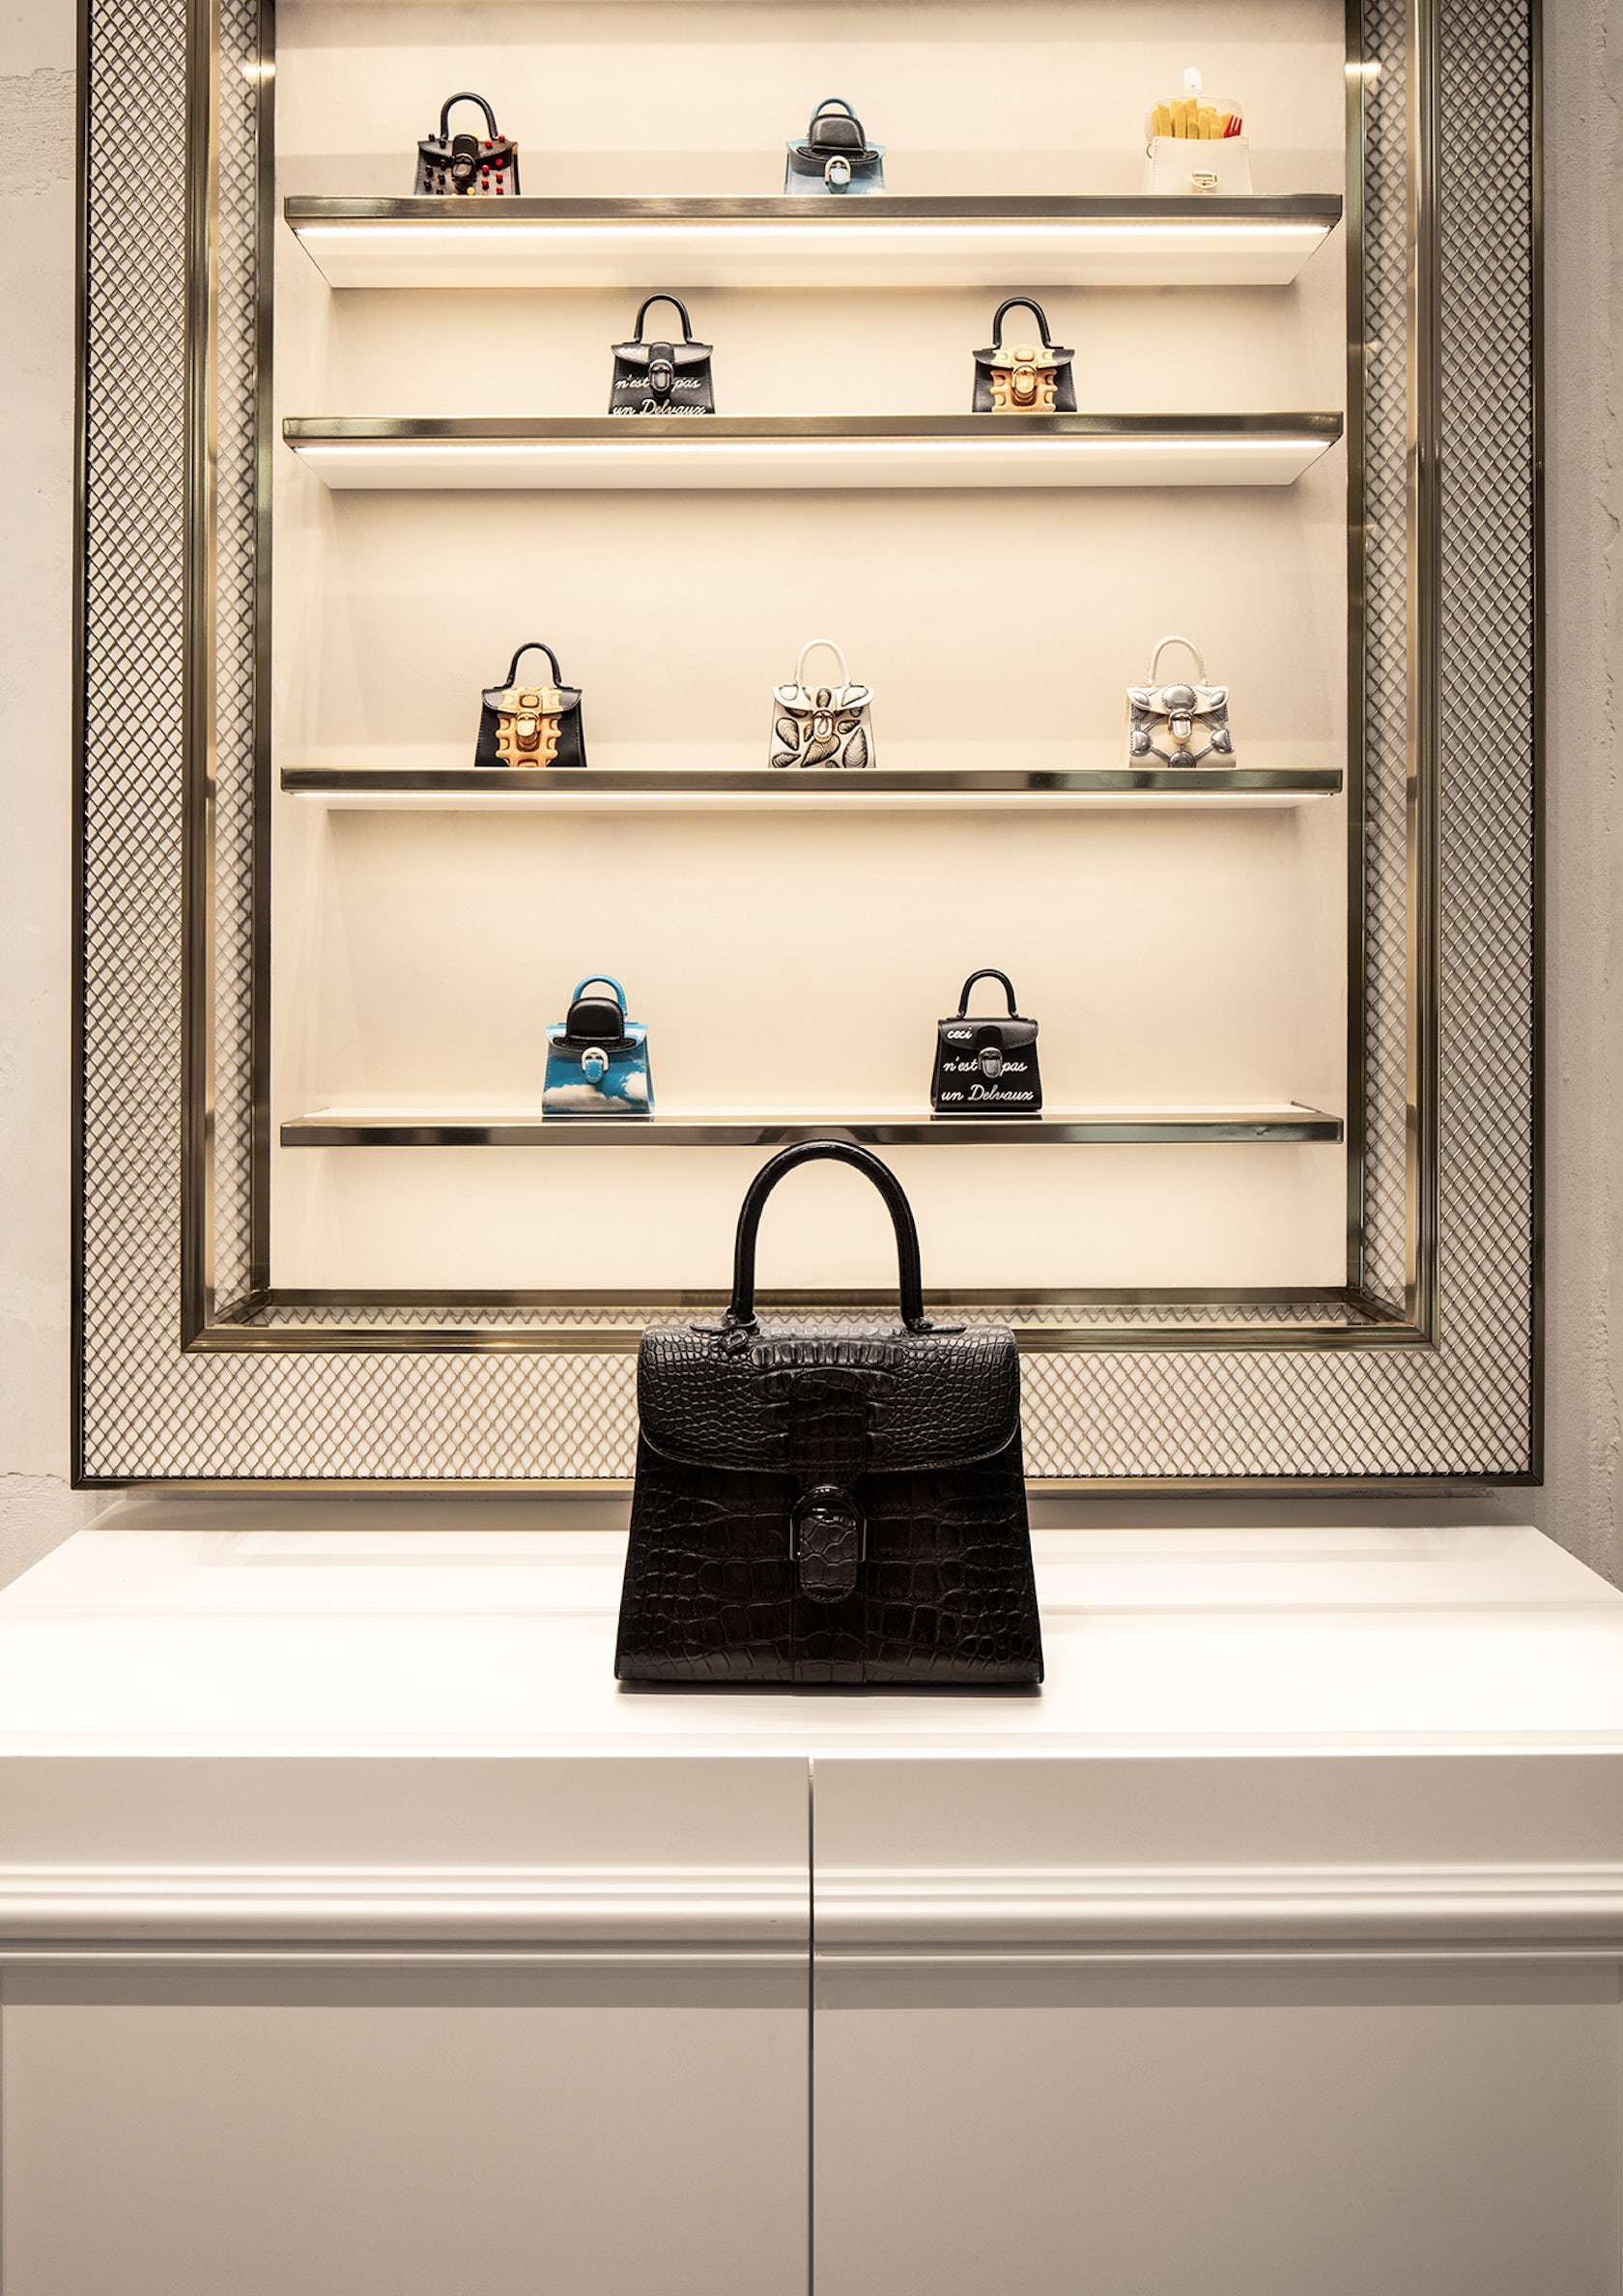 Delvaux has New Bond Street store location in the bag